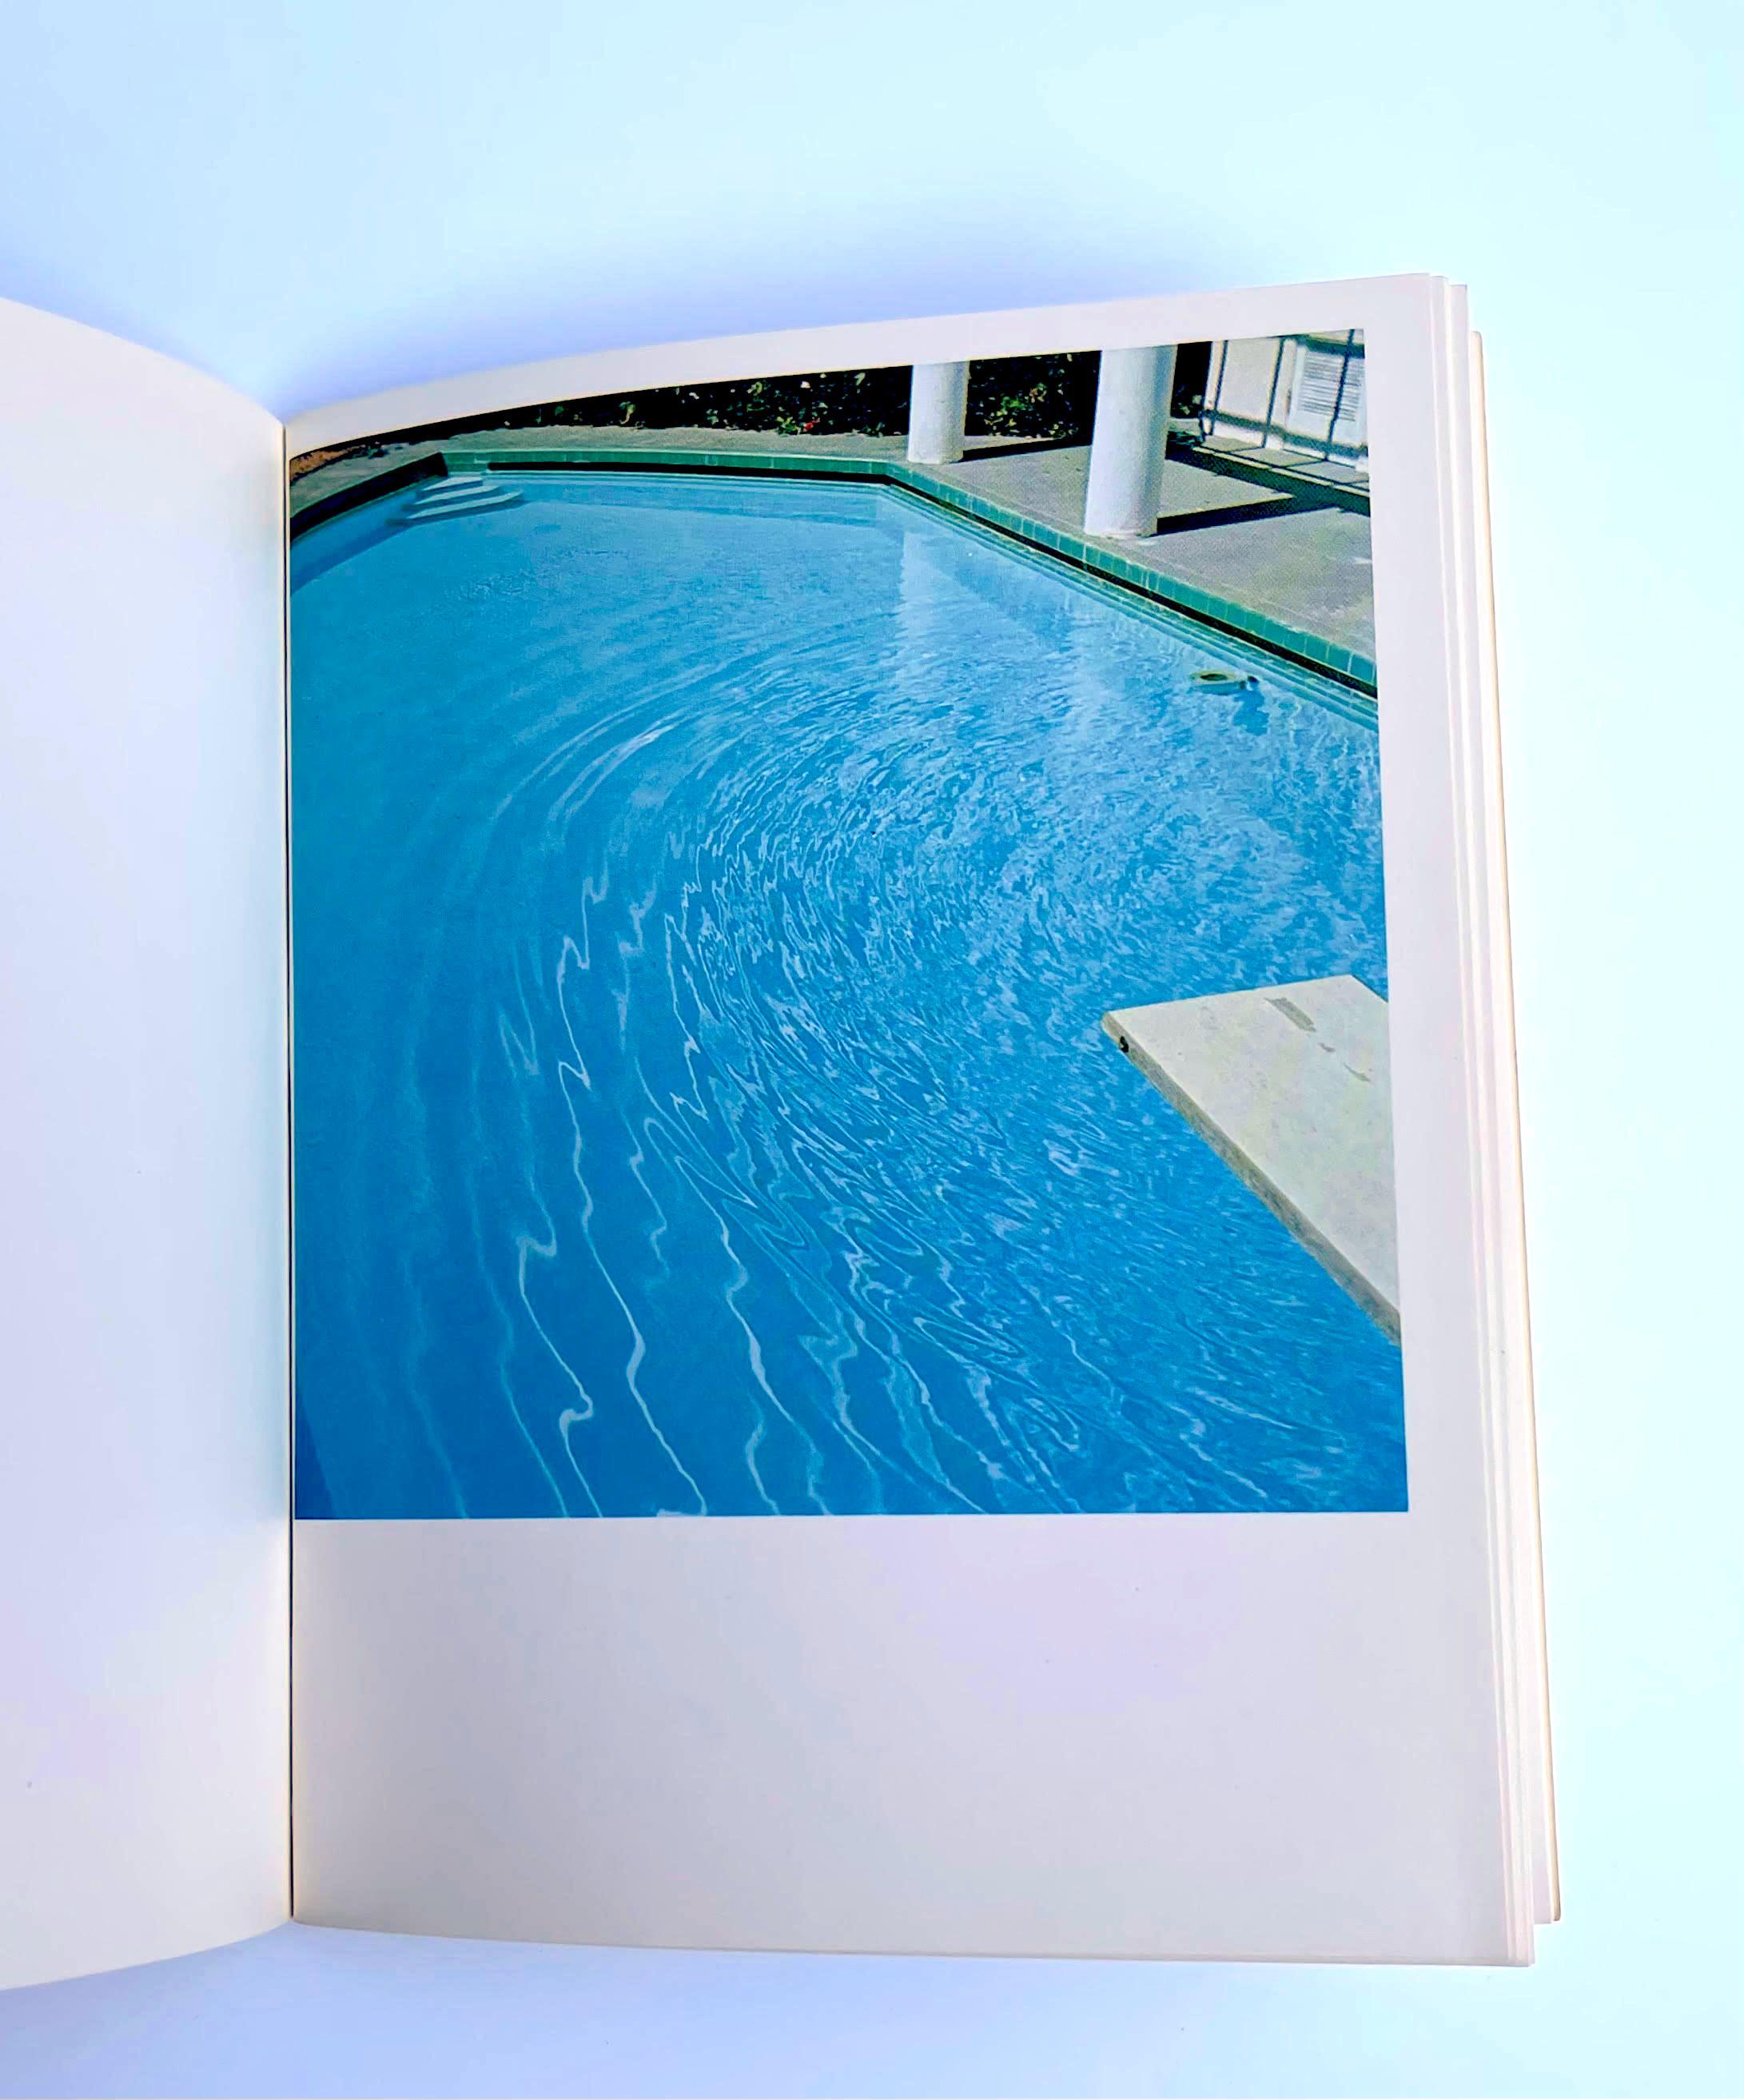 Nine Swimming Pools and a Broken Glass (Hand signed by Ed Ruscha) For Sale 9